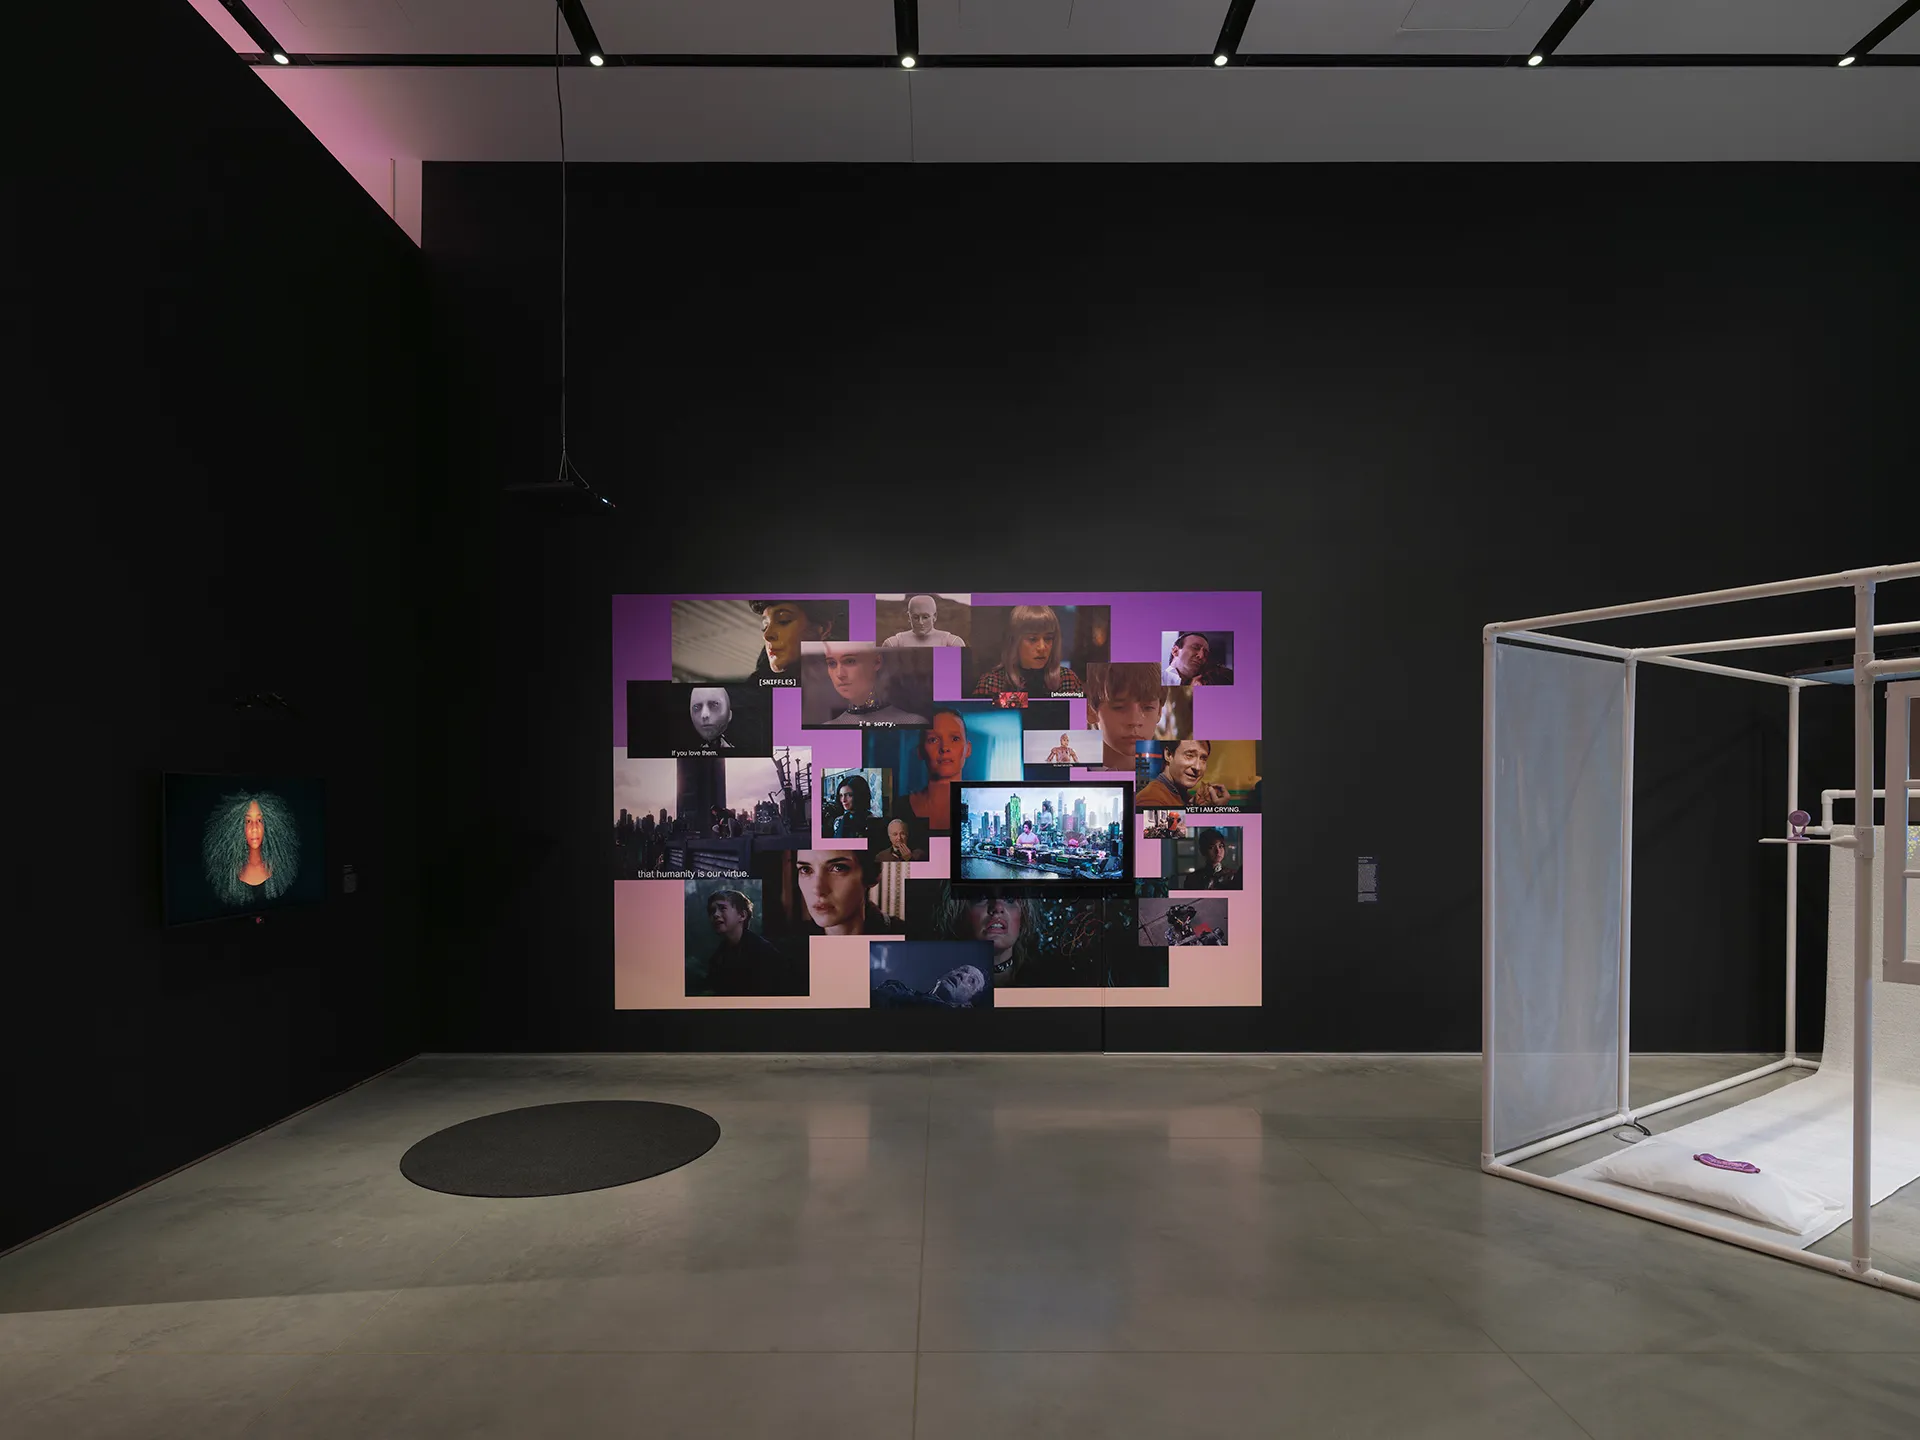 Gallery interior with black walls and a gray floor. On the back wall, there is a print collaged with images from popular media. On the right, there is a partial view of a structure made of PVC pipes. On the left, at an angle, a mounted video monitor displays a woman’s face. There is a round rug on the floor.